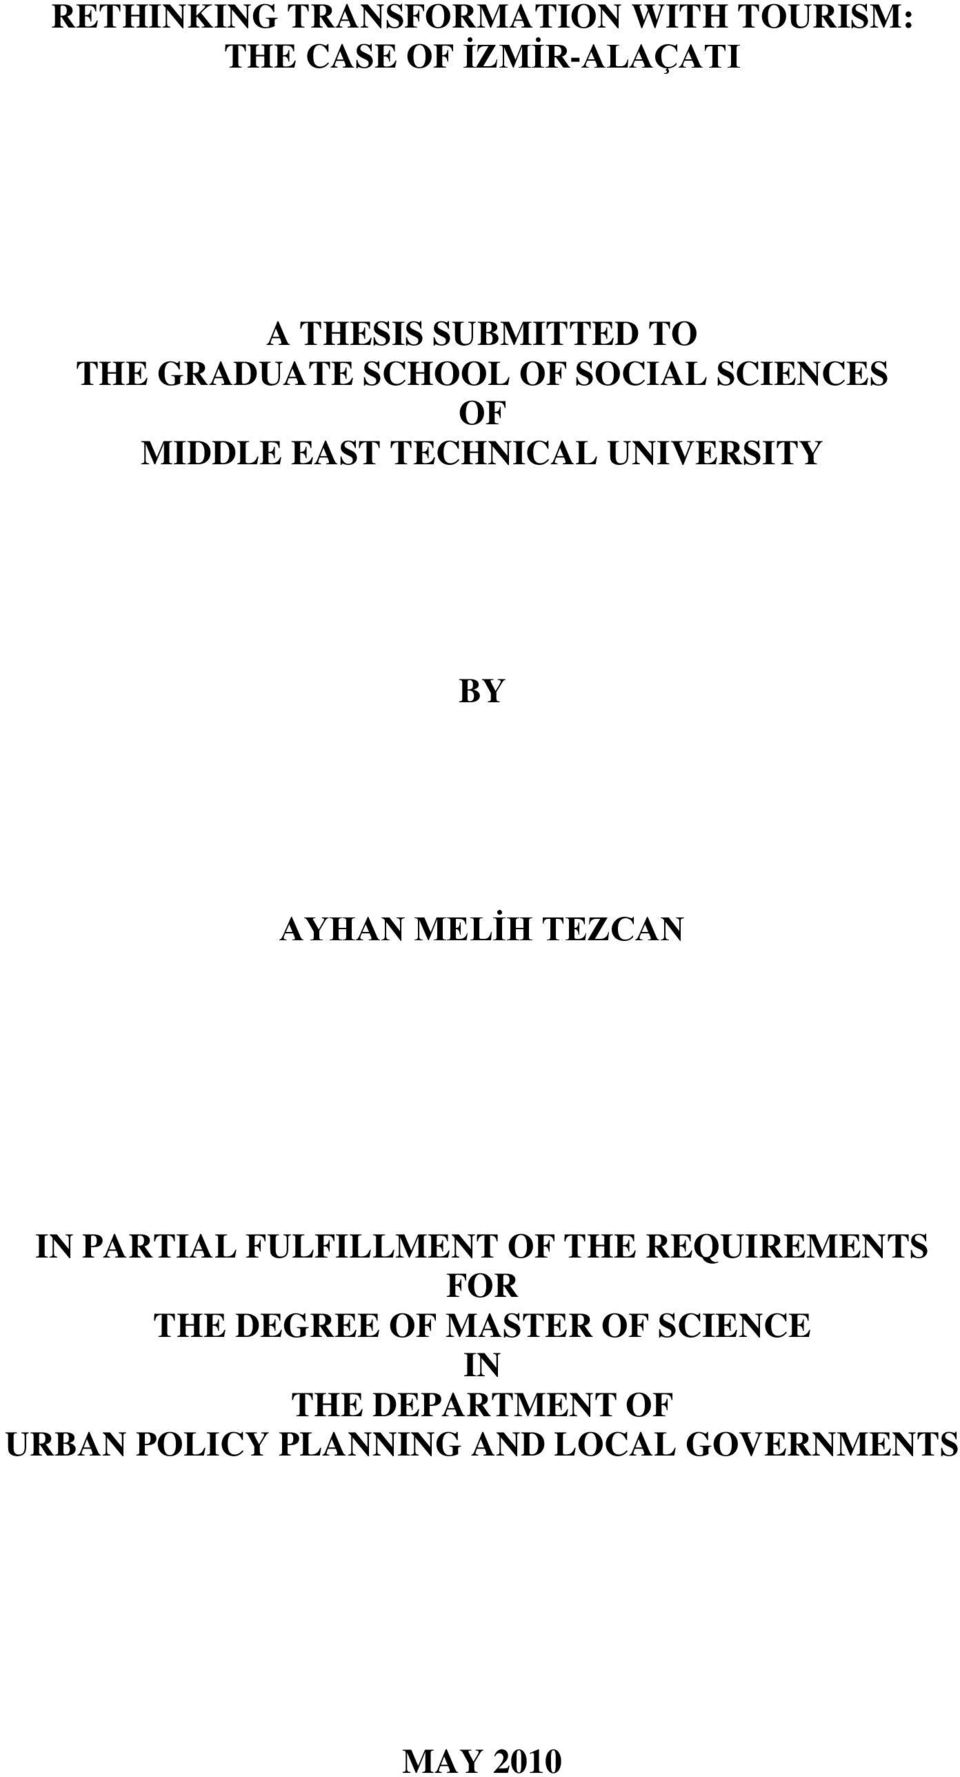 AYHAN MELİH TEZCAN IN PARTIAL FULFILLMENT OF THE REQUIREMENTS FOR THE DEGREE OF